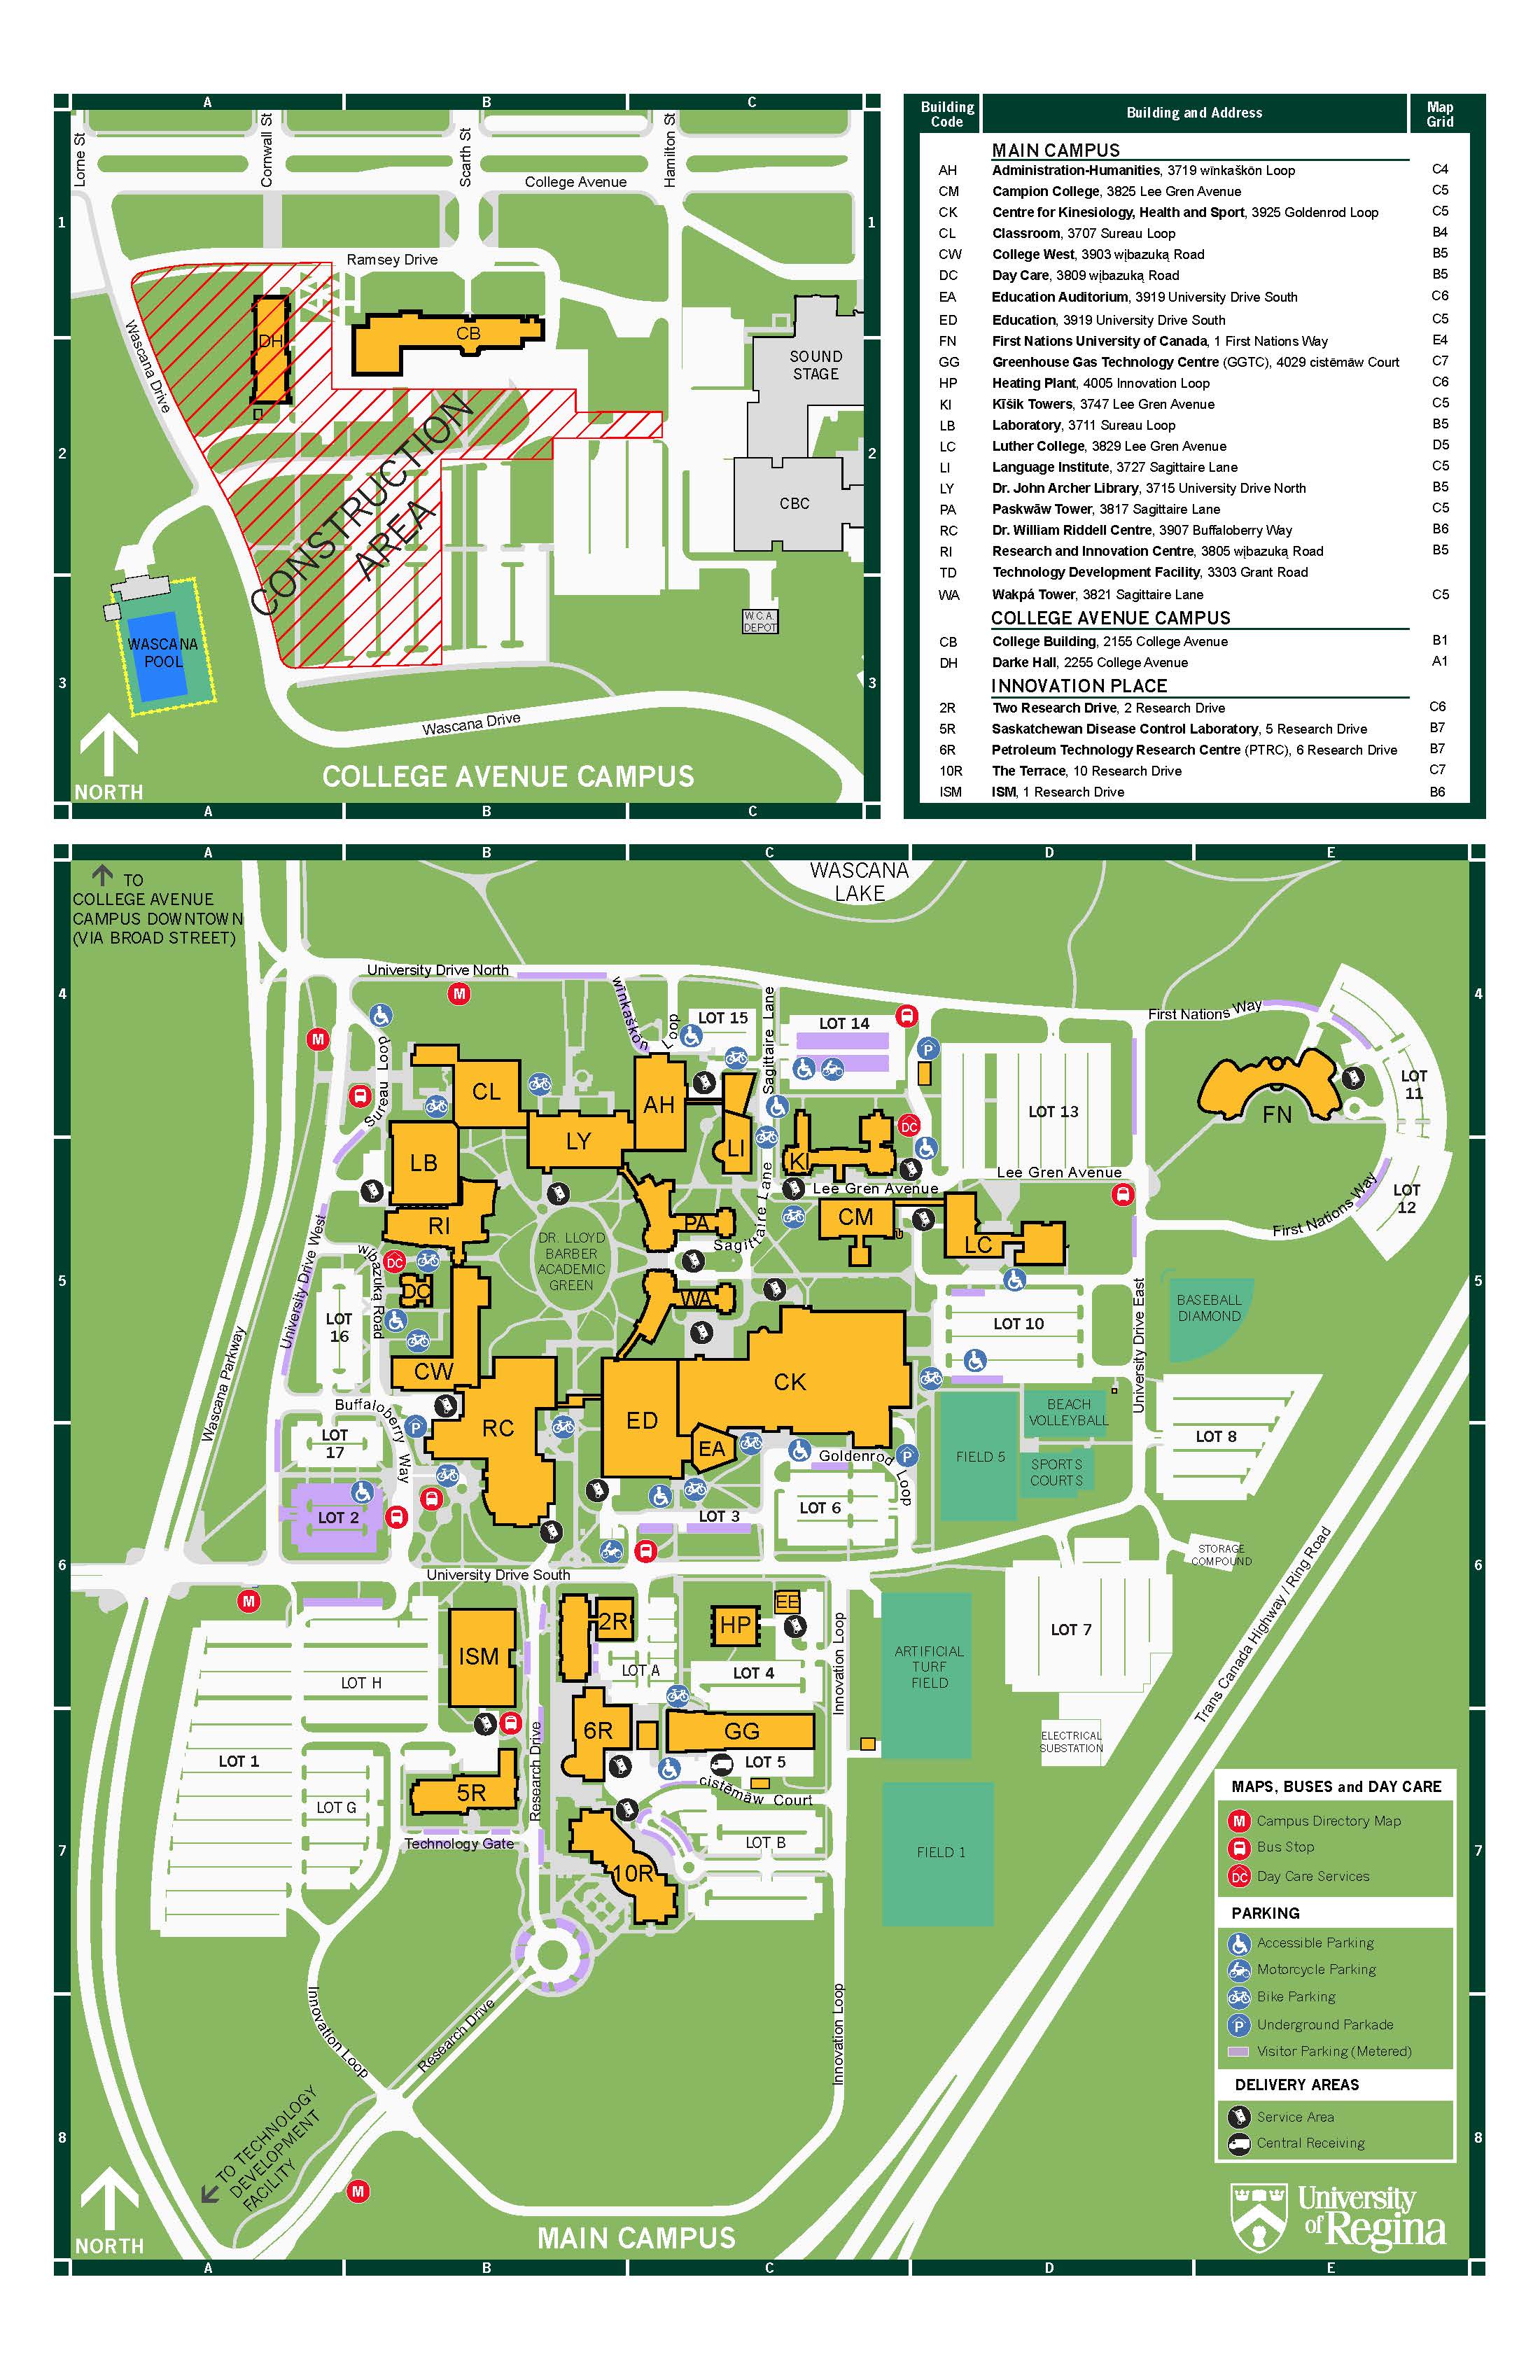 U of R Logo - Campus Maps and Directions | Contact Us, University of Regina